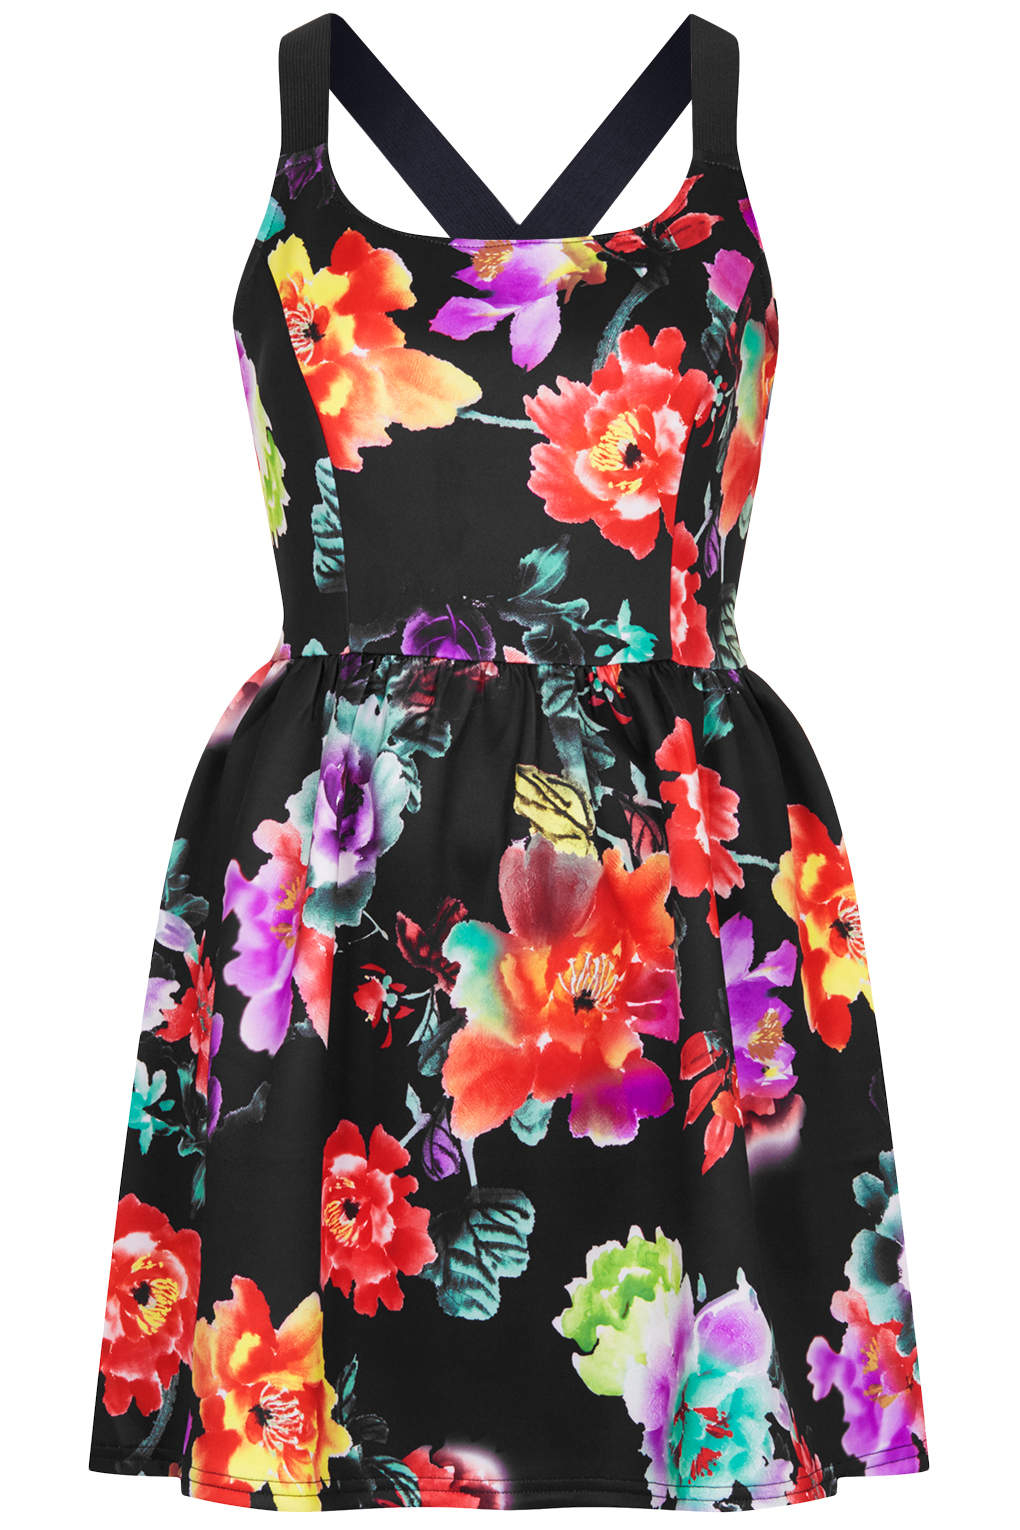 Lyst - Topshop Floral Skater Dress with Cross Over Straps